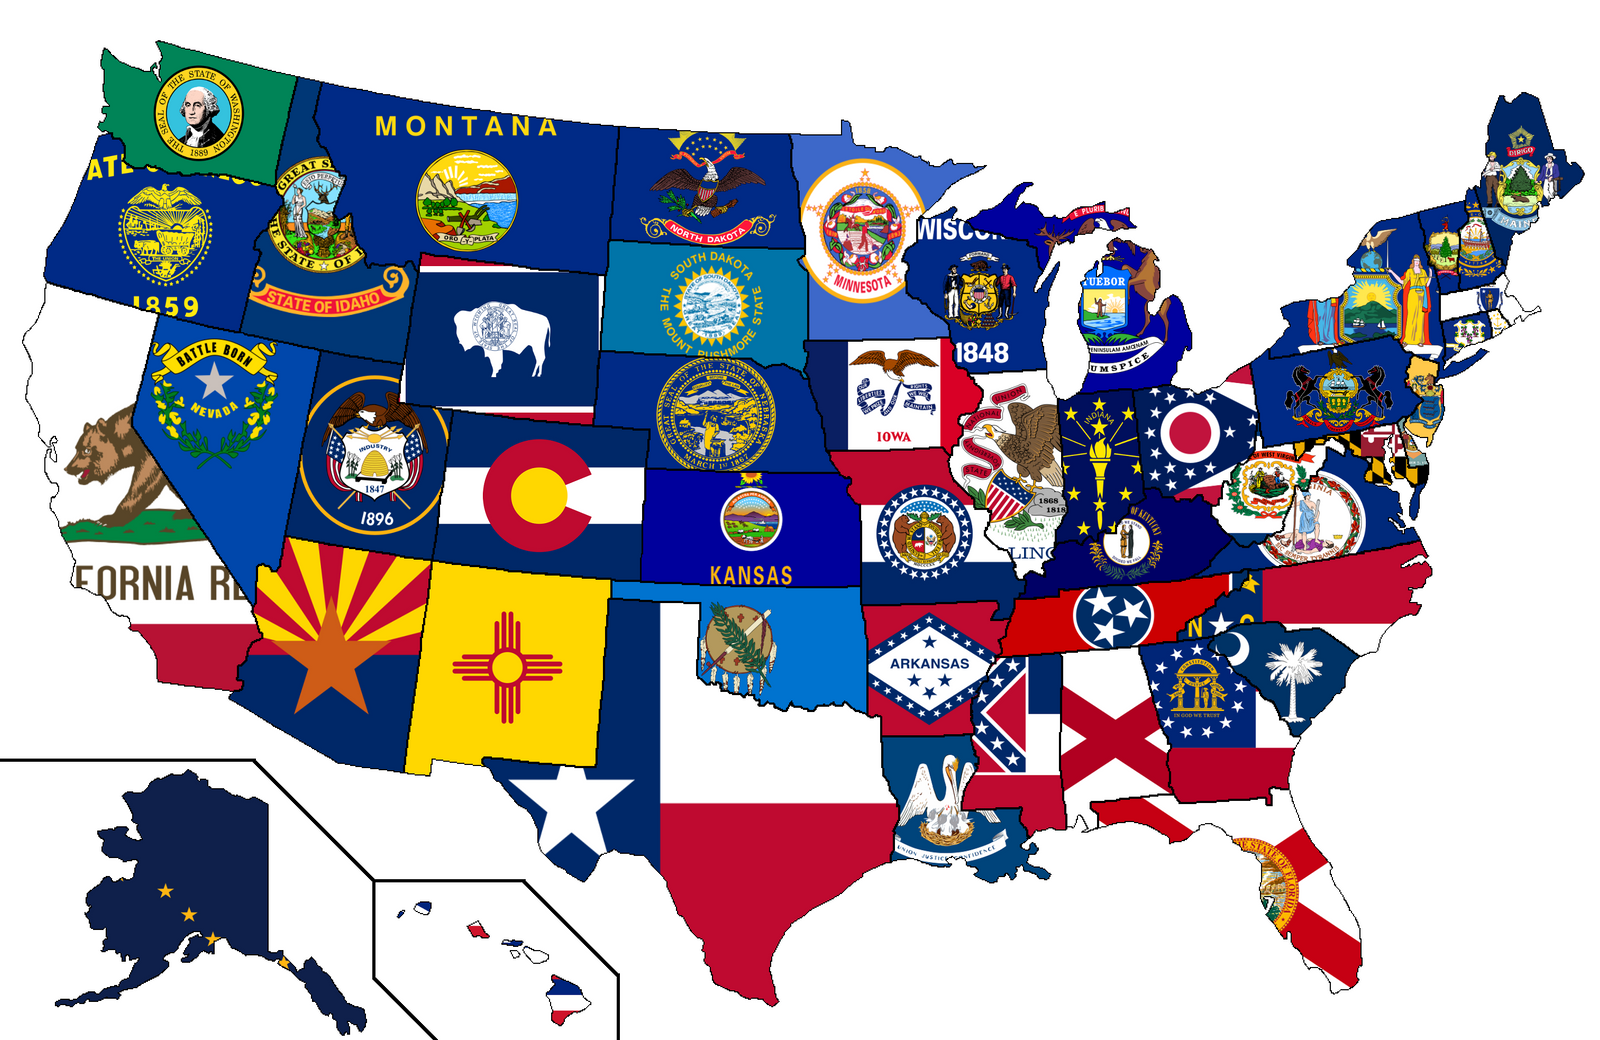 colours-of-the-us-state-s-flags-blended-into-one-colour-1513x983-r